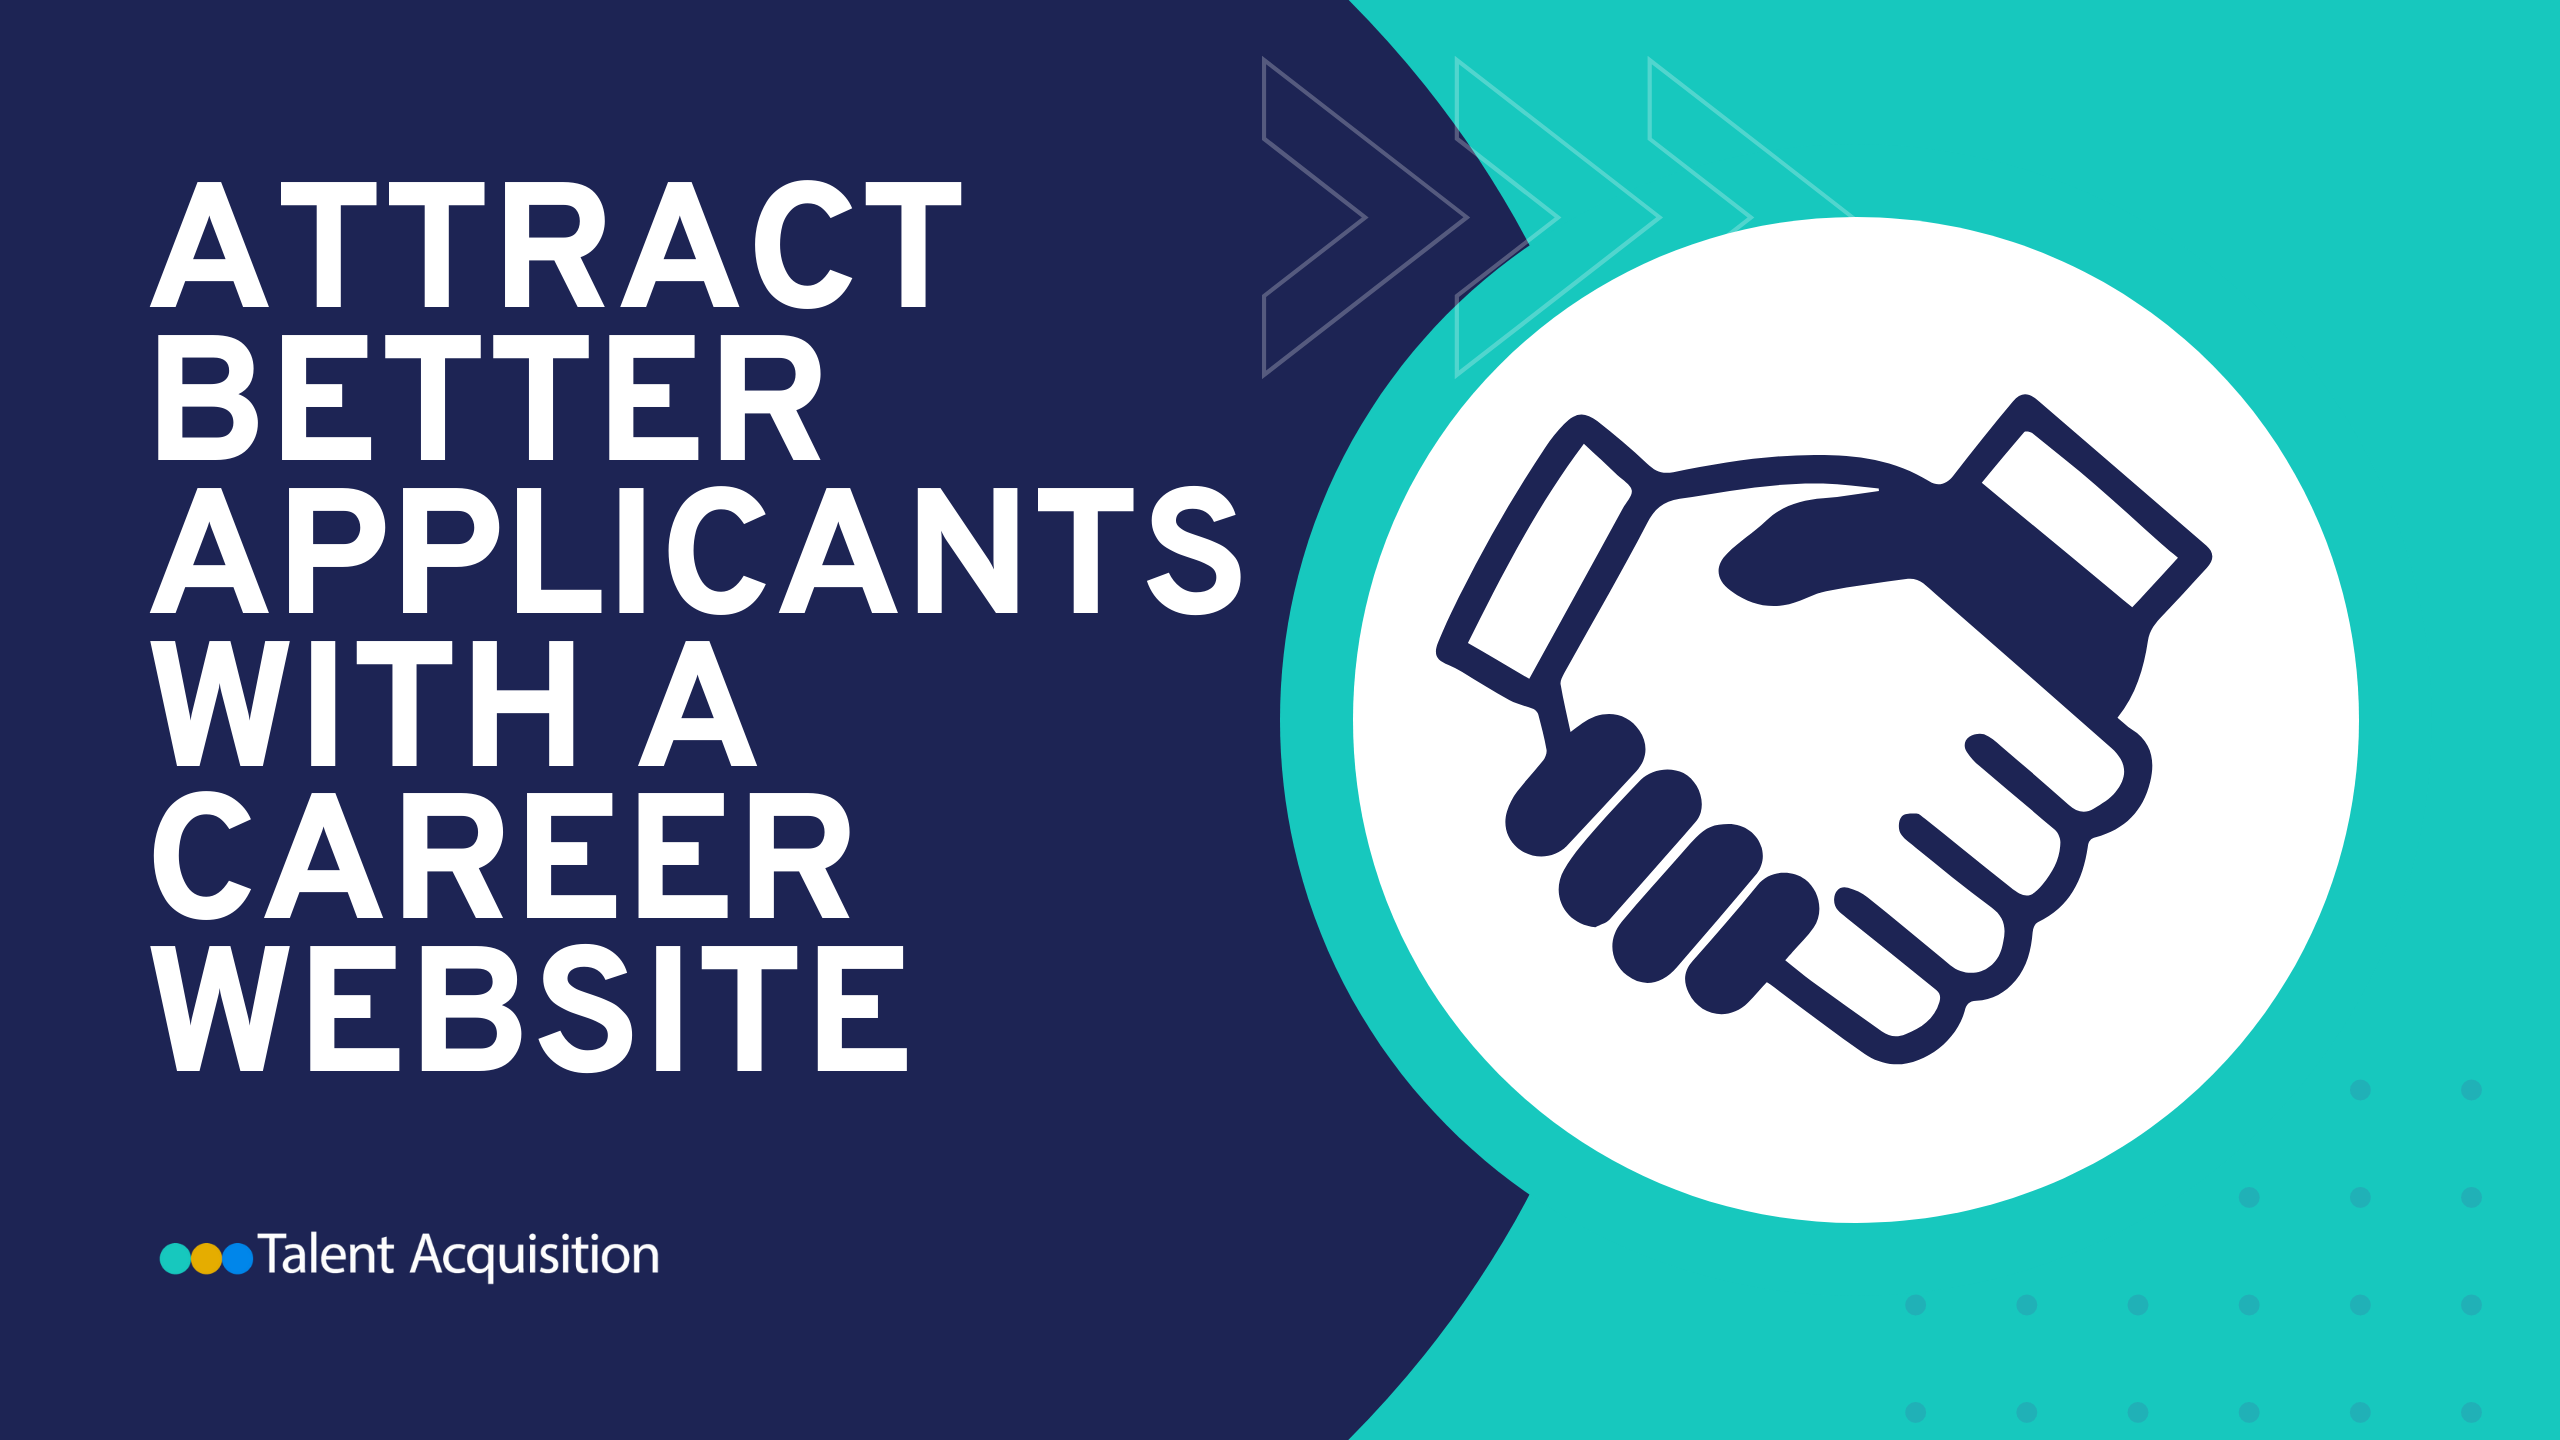 Attract Better Applicants with a Career Website